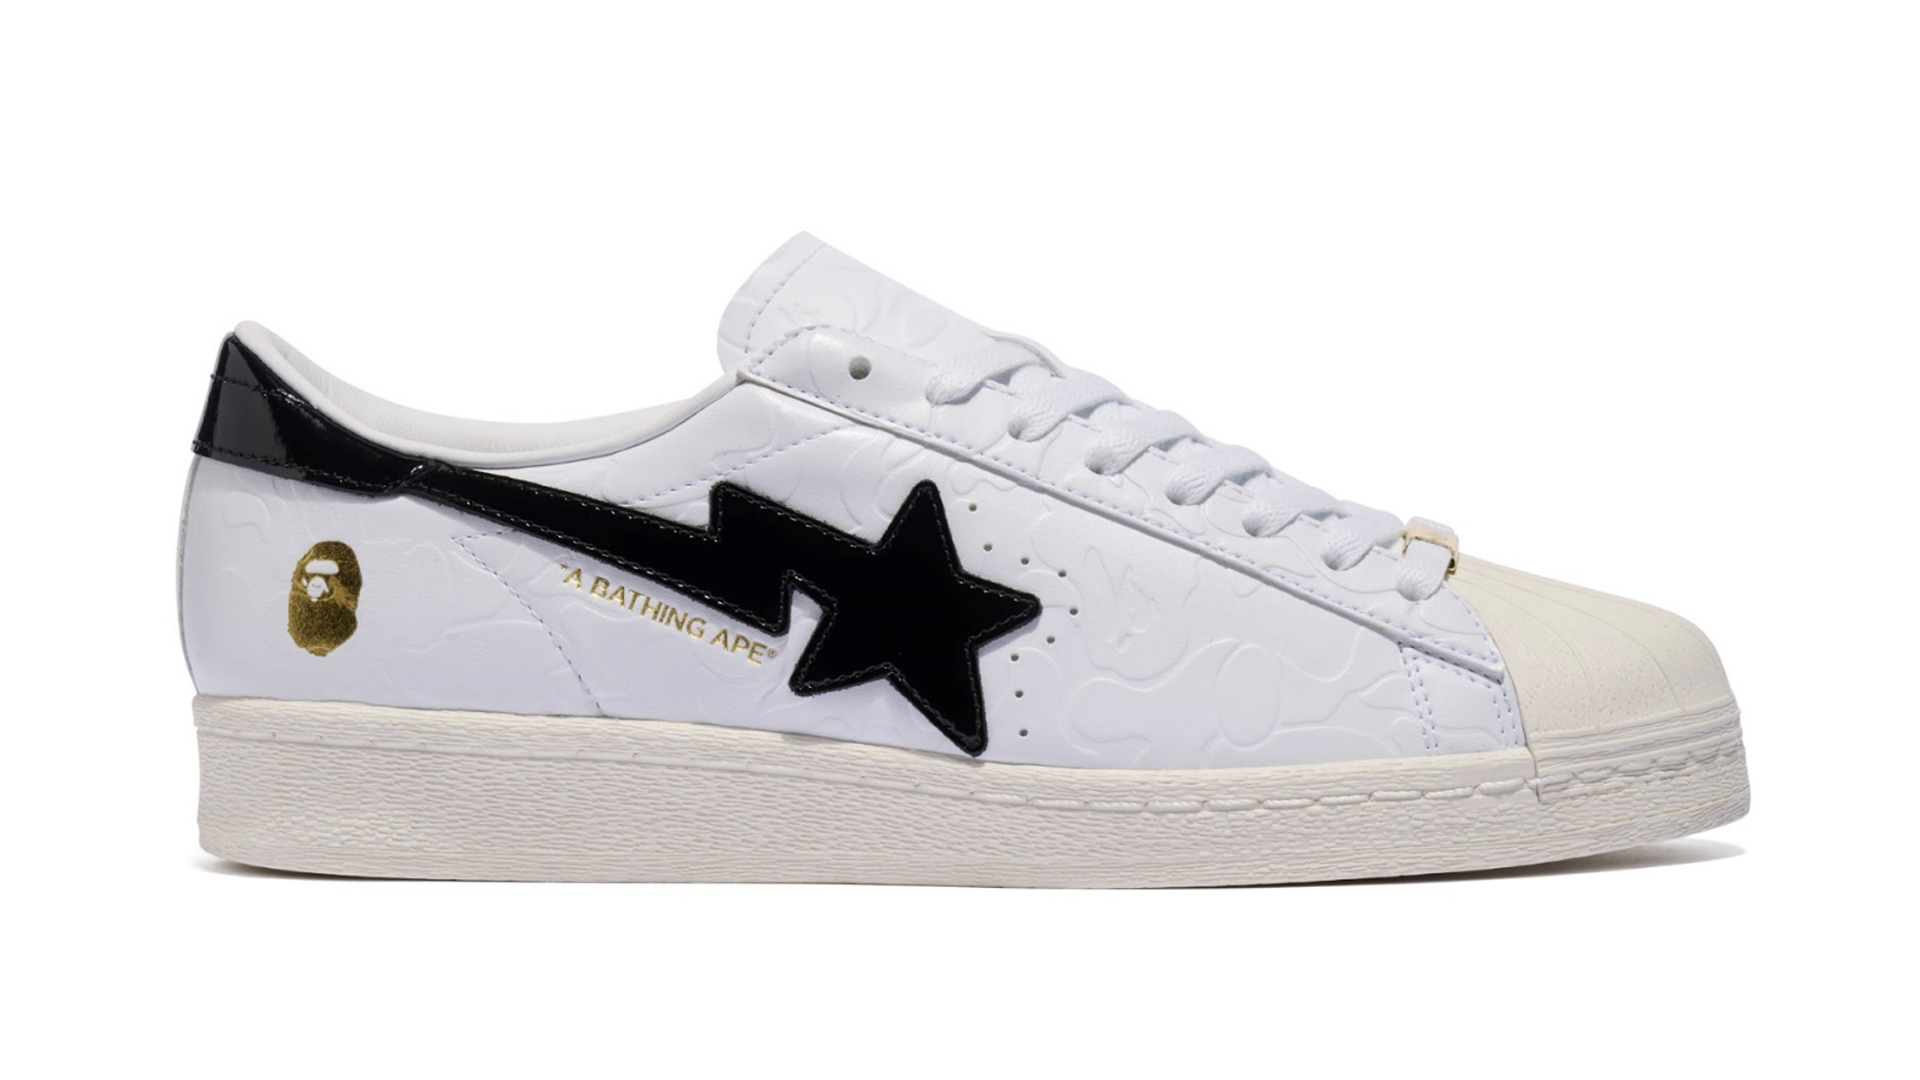 Side view of a white BAPE x adidas Superstar sneaker, featuring a black star logo and gold branding detail near the heel